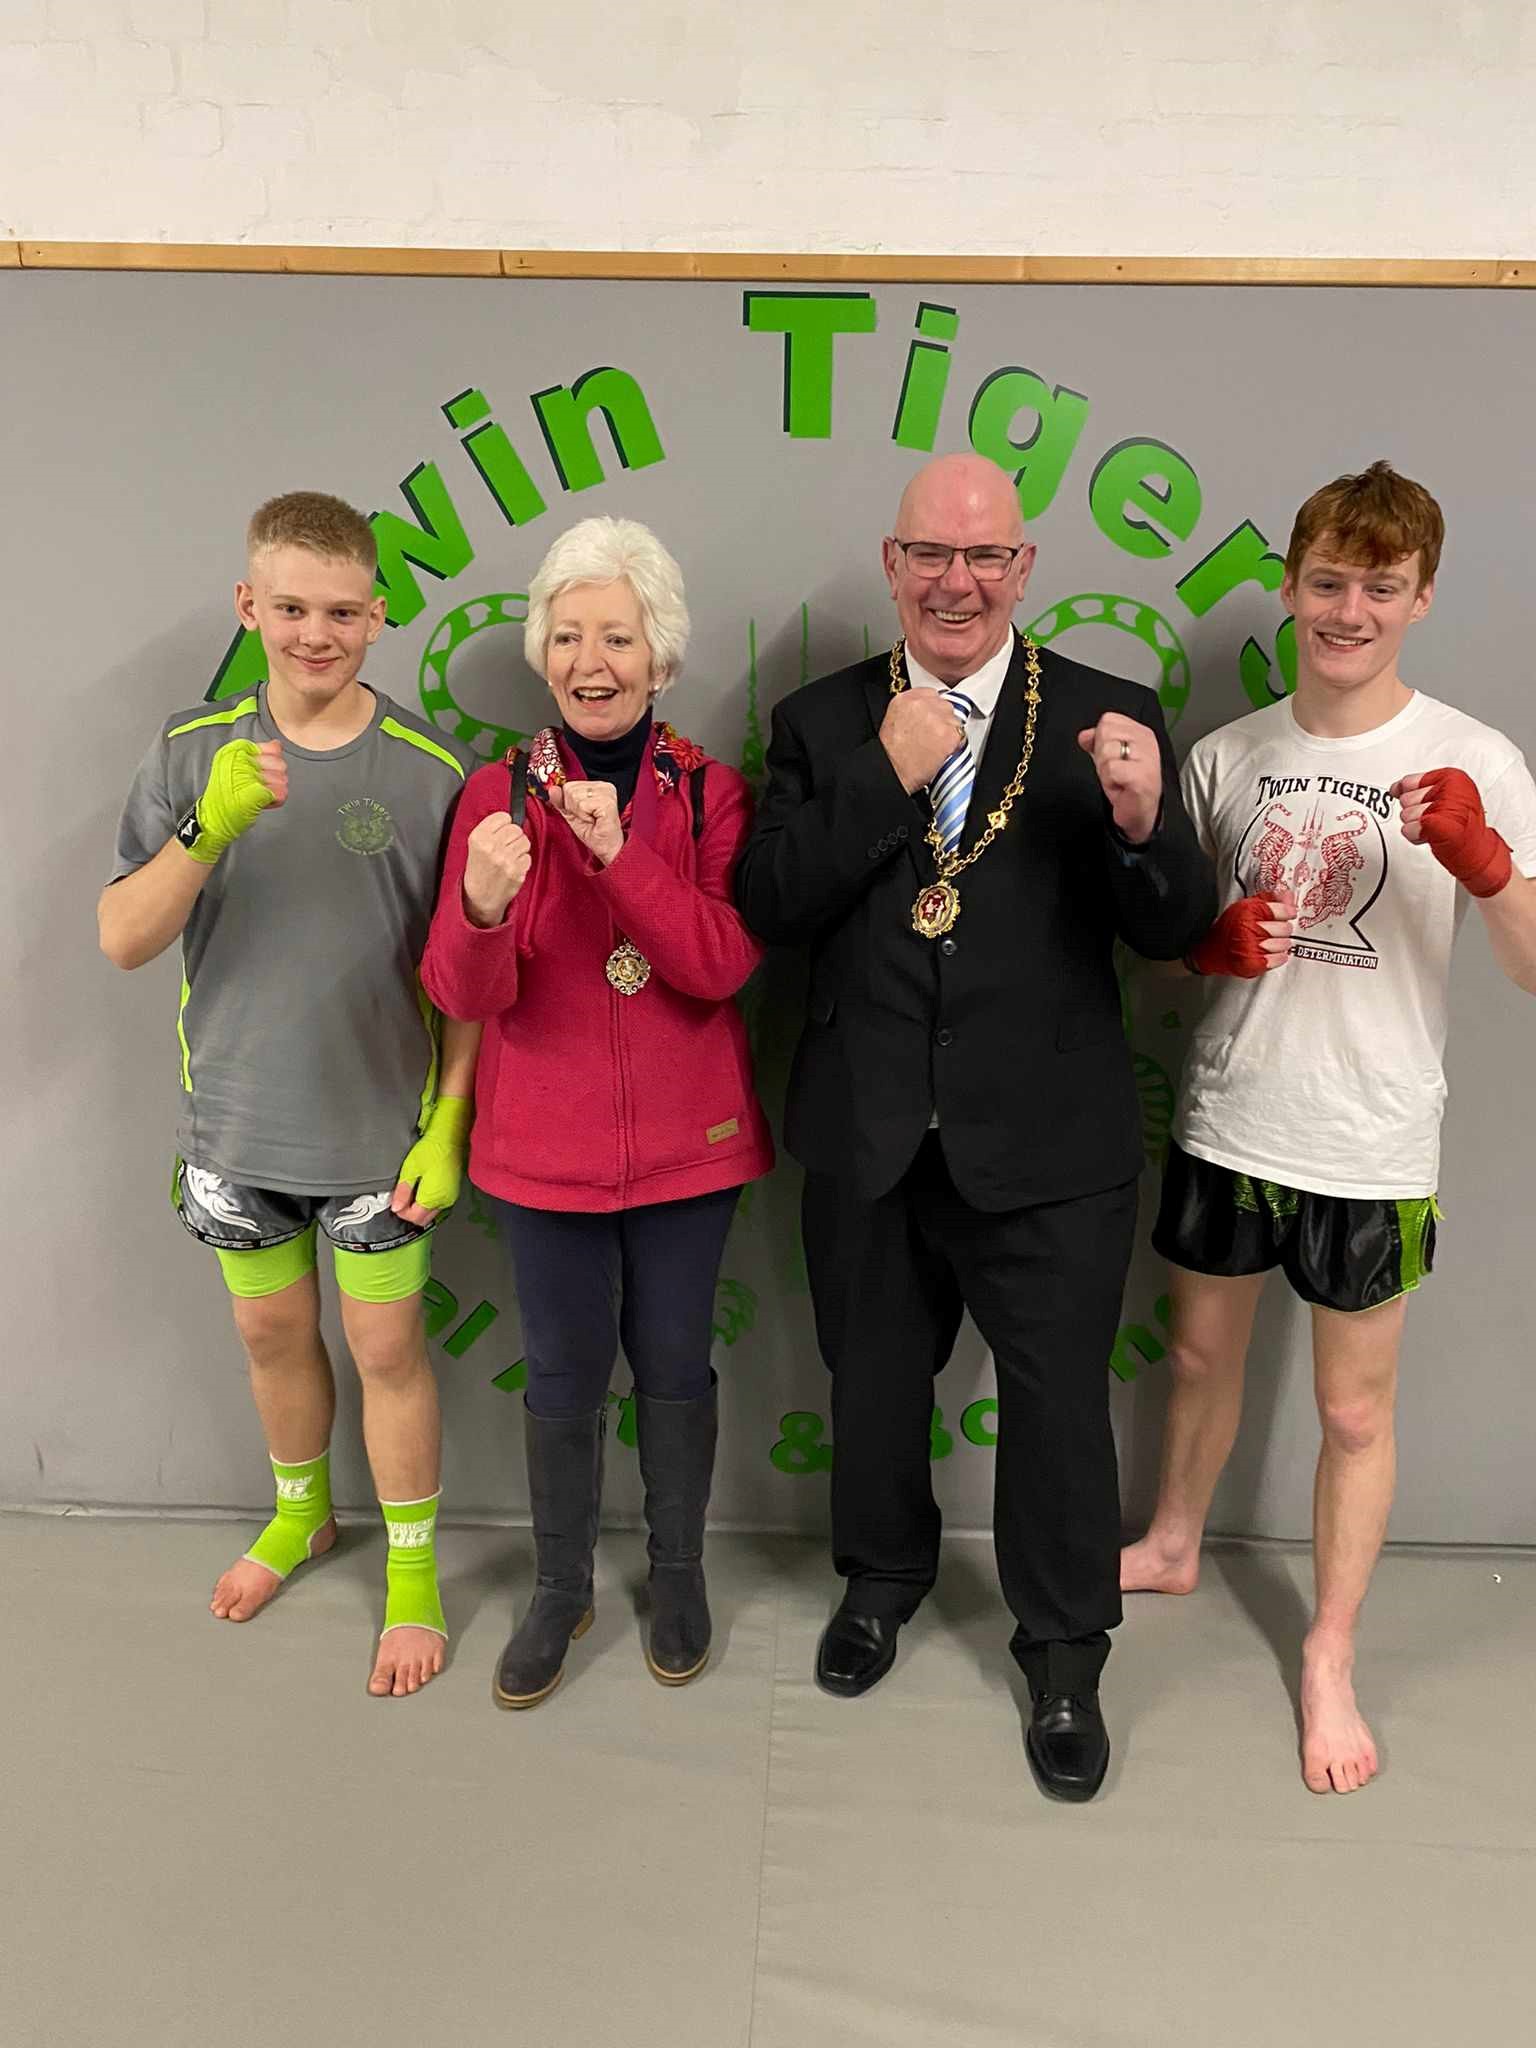 Two students represent Team GB at the Muay Thai World Games in Thailand